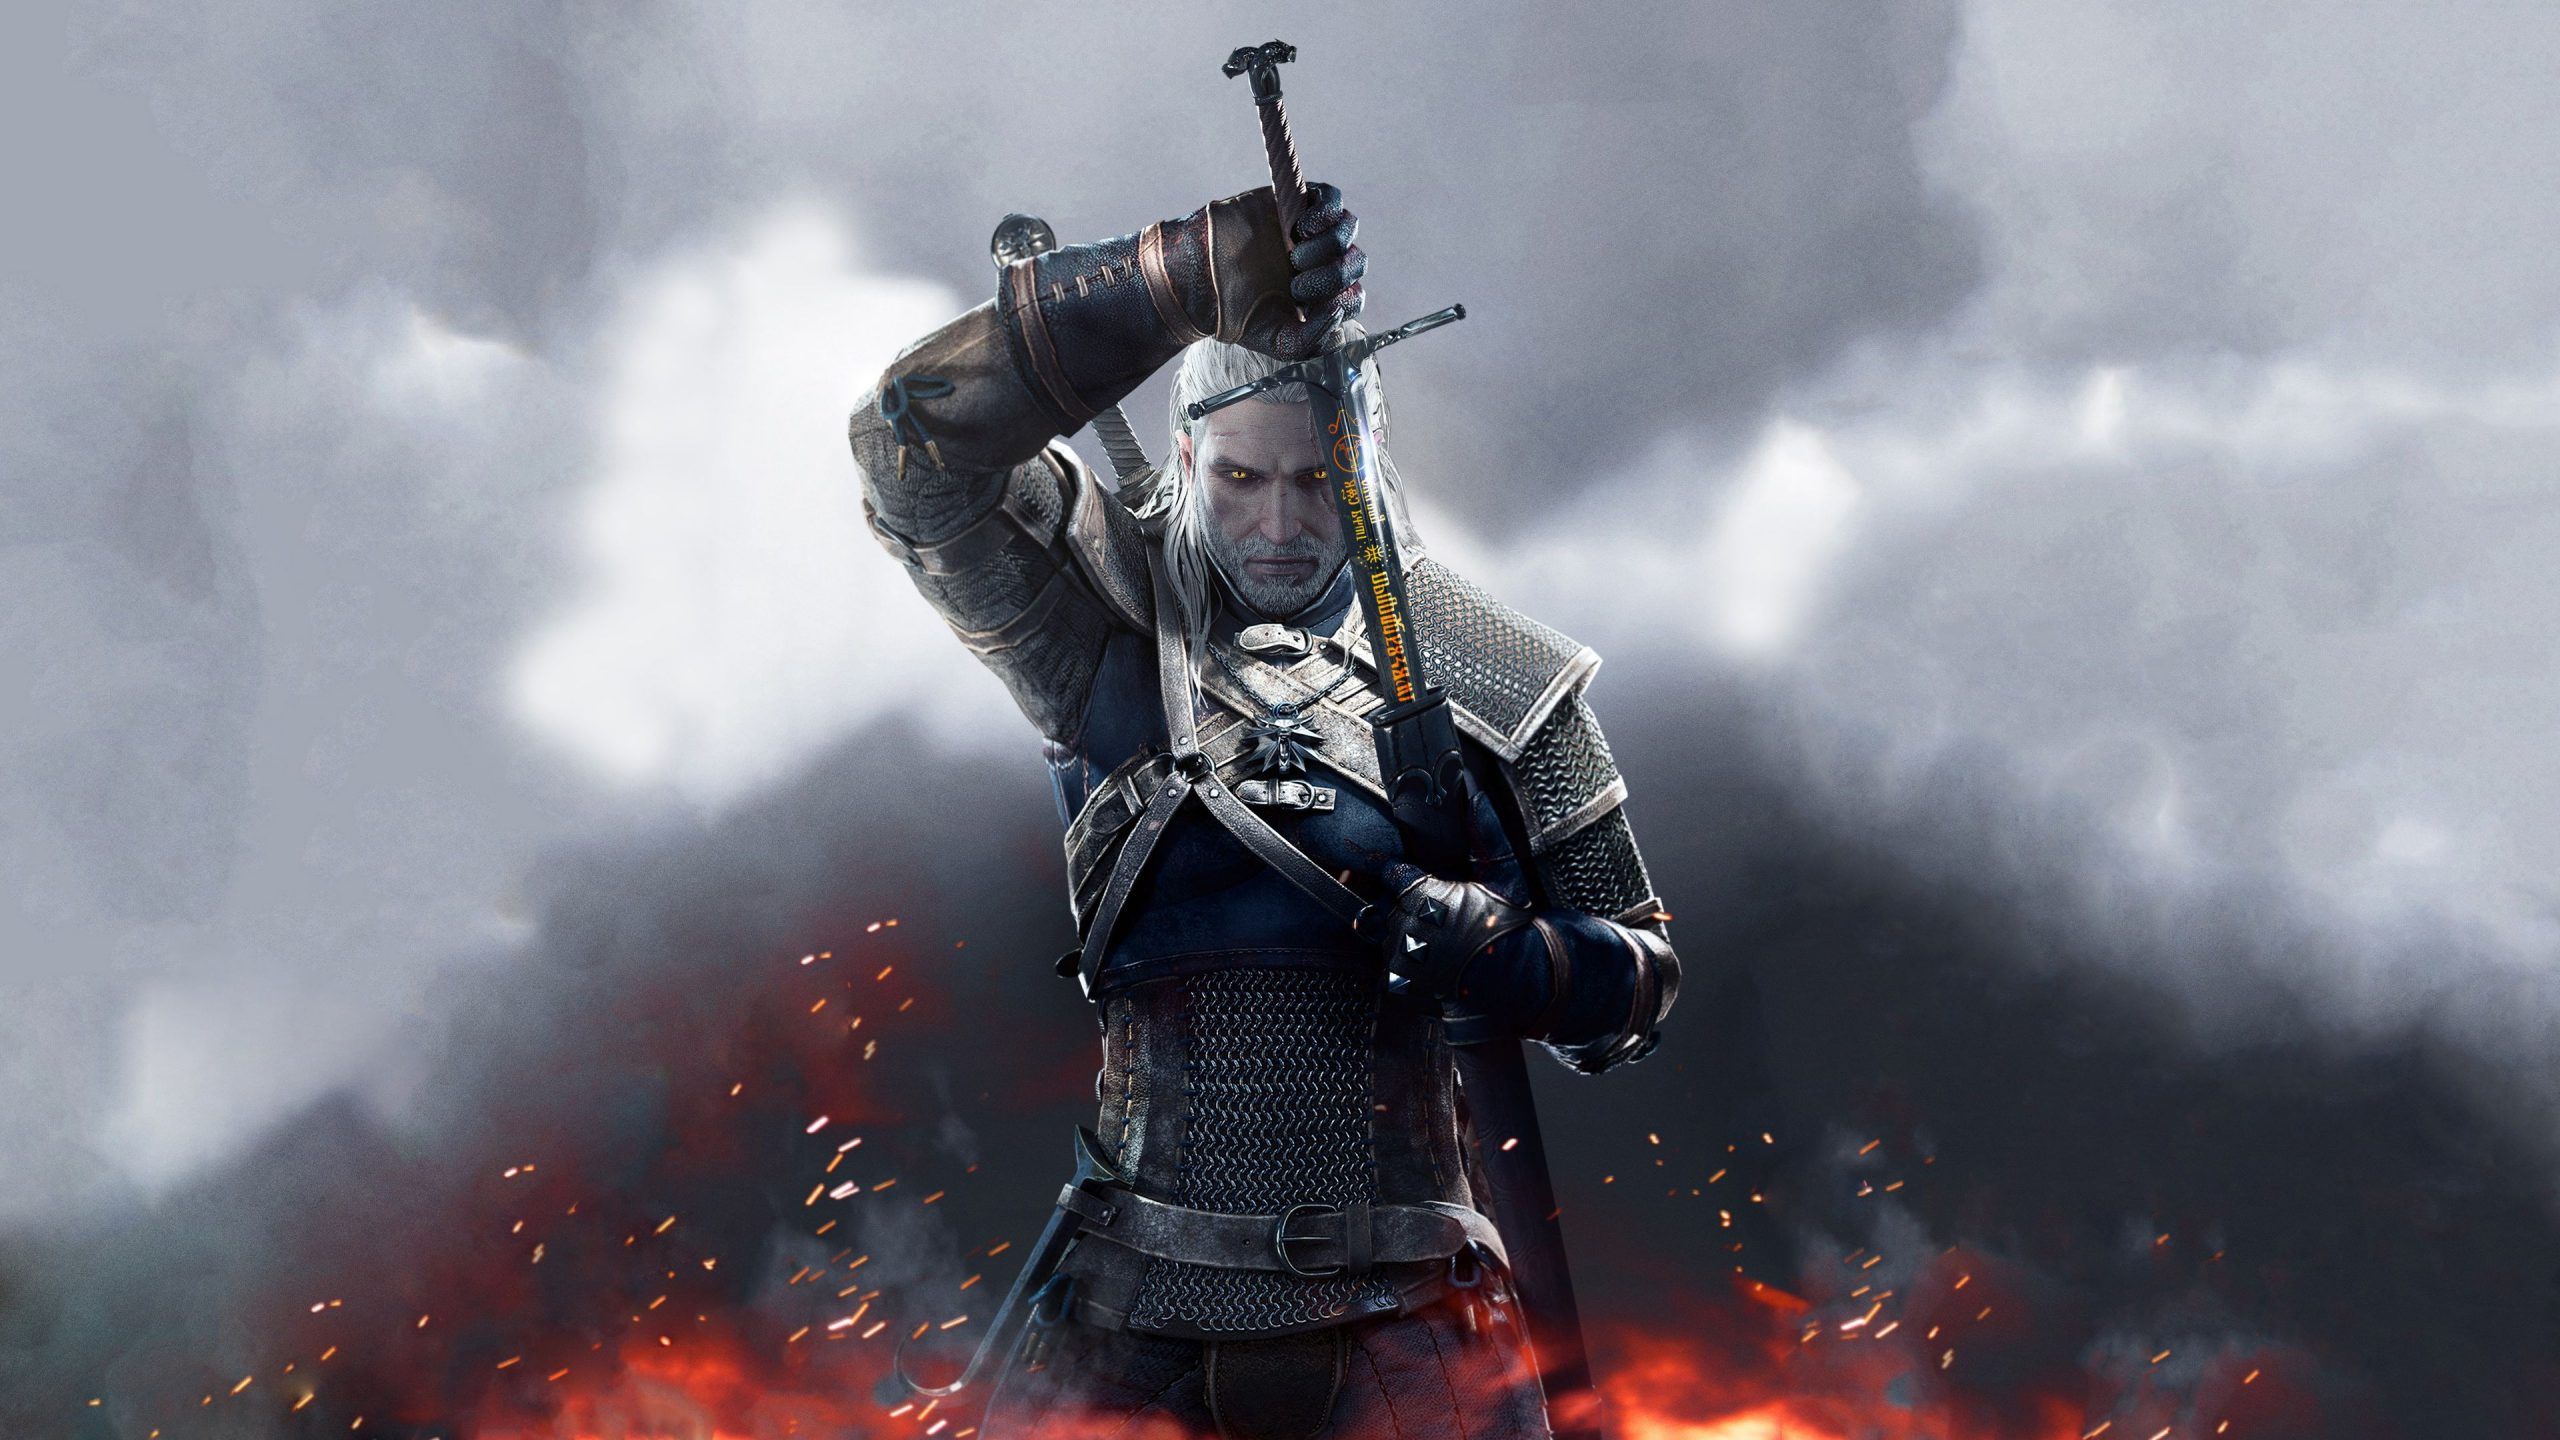 Witcher Game Wallpaper Free HD Wallpaper